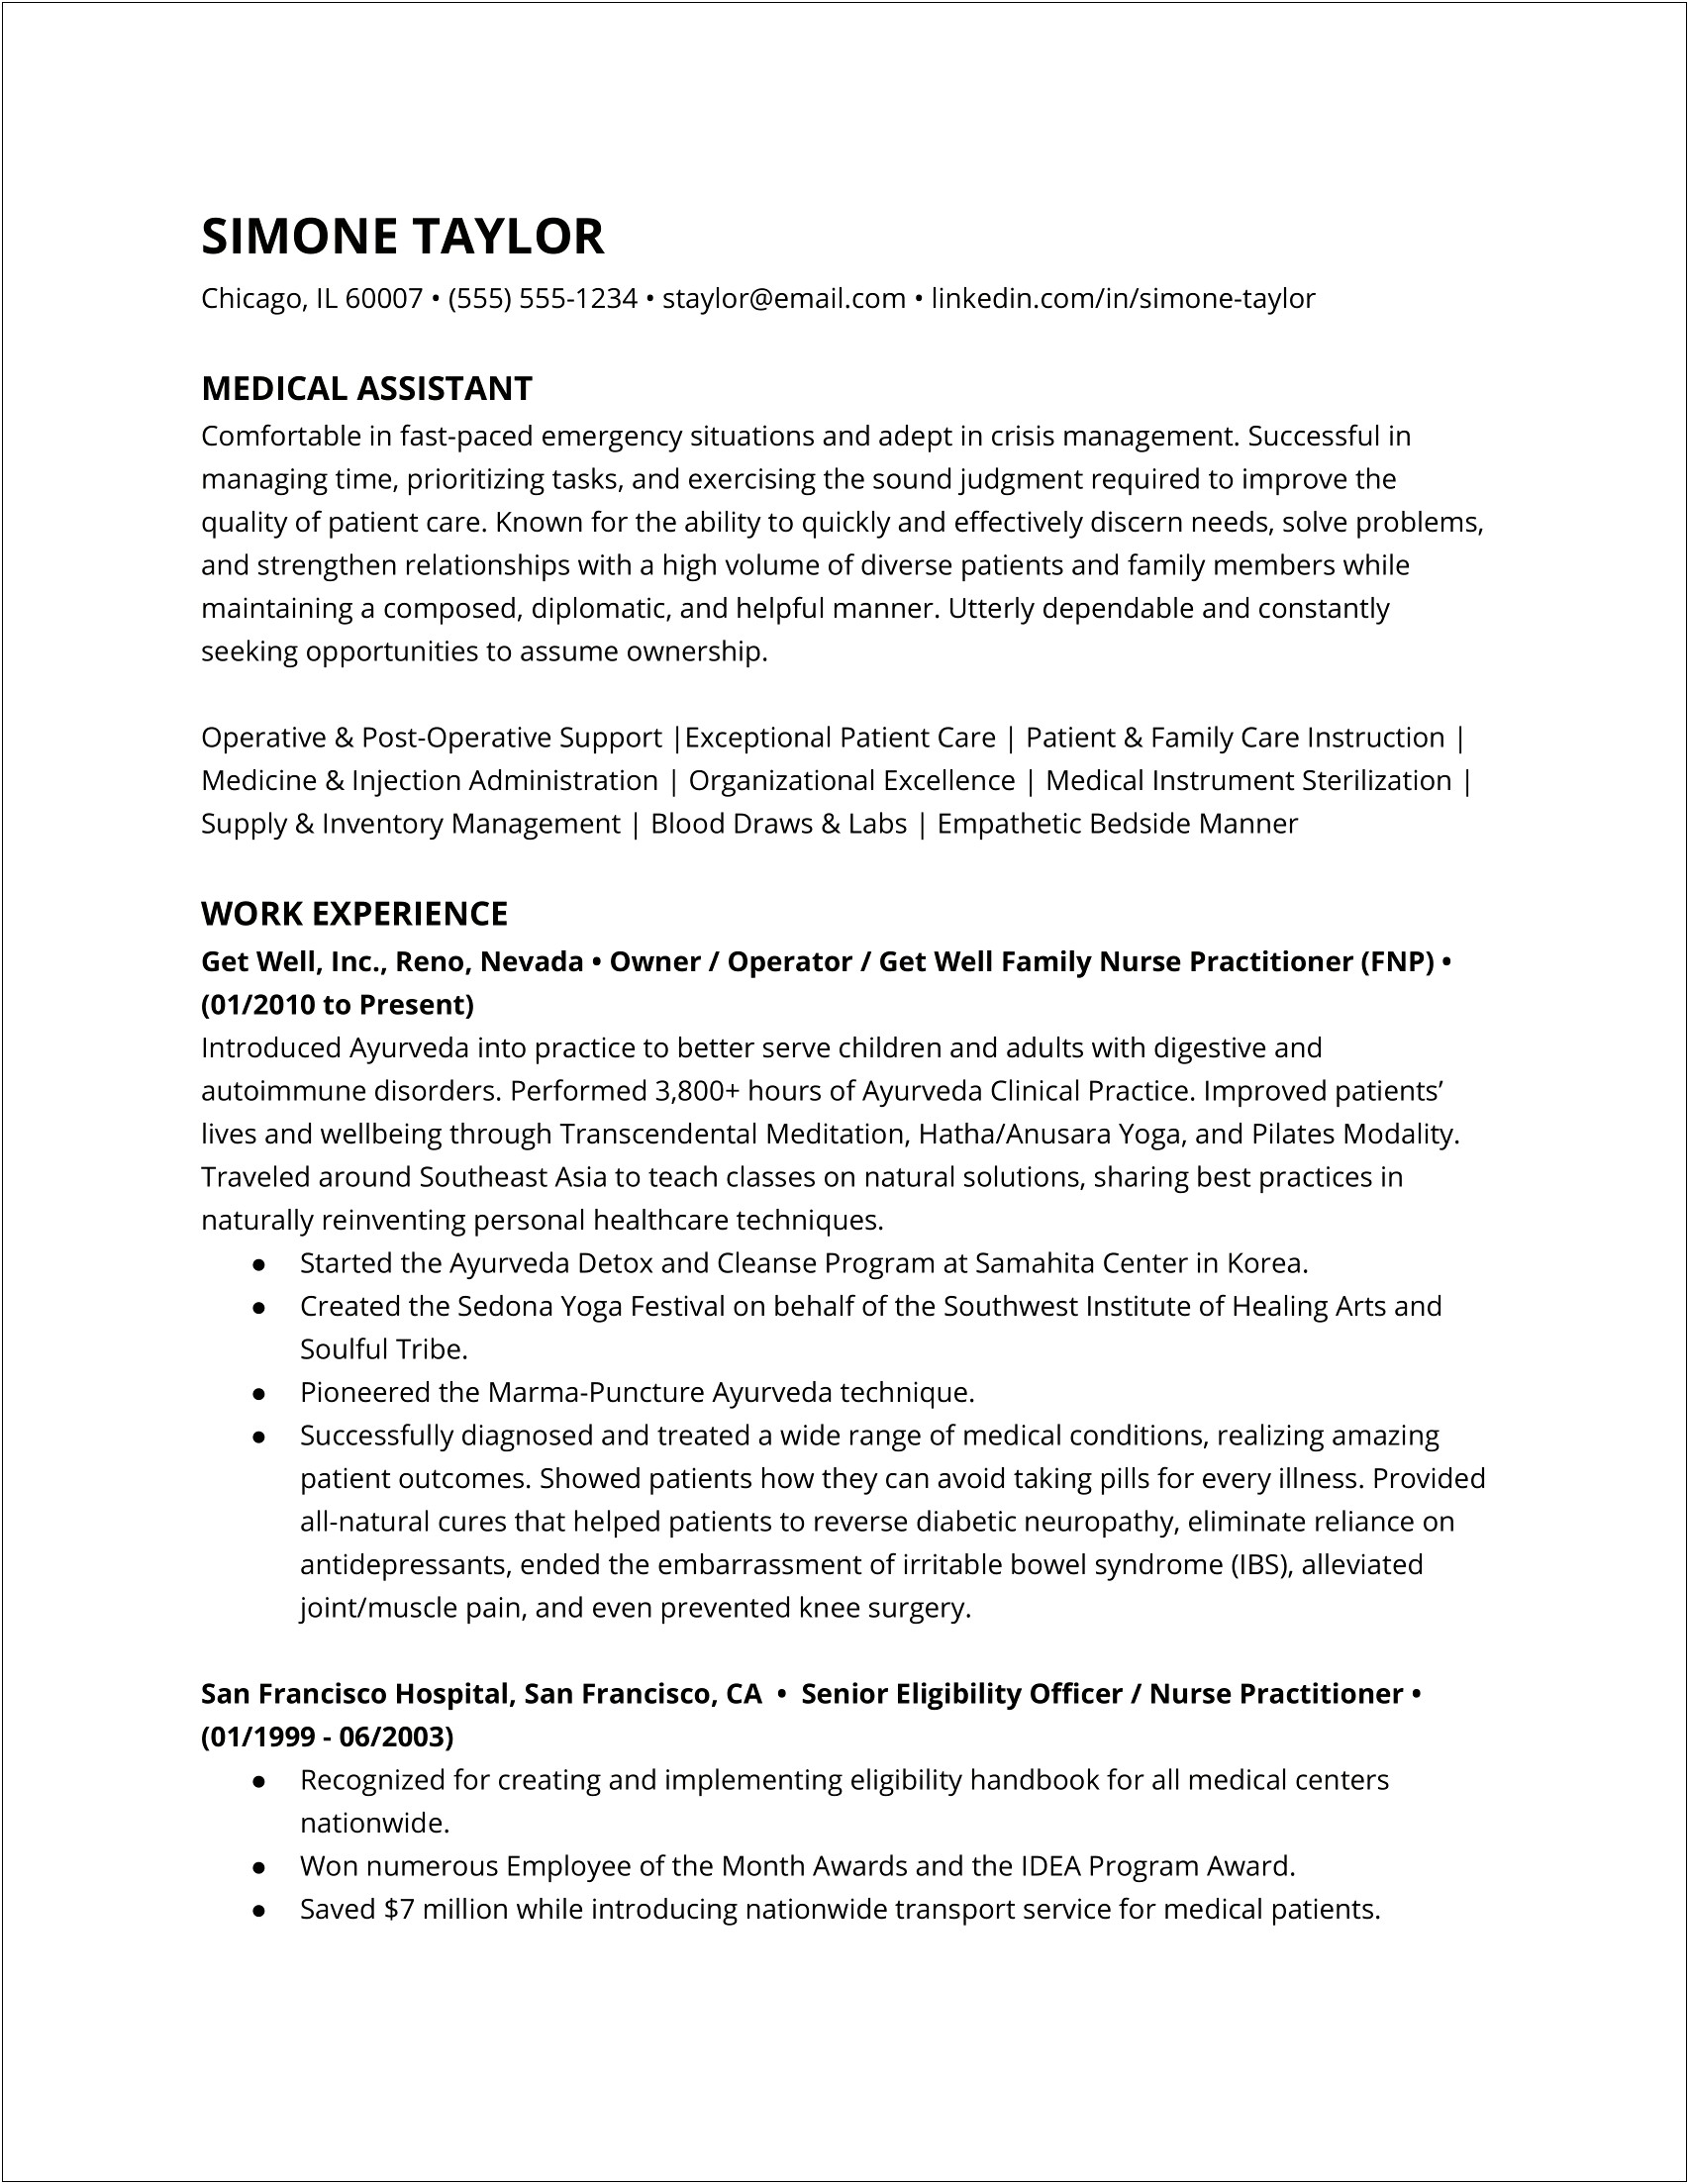 Entry Level Healthcare Administration Resume Samples